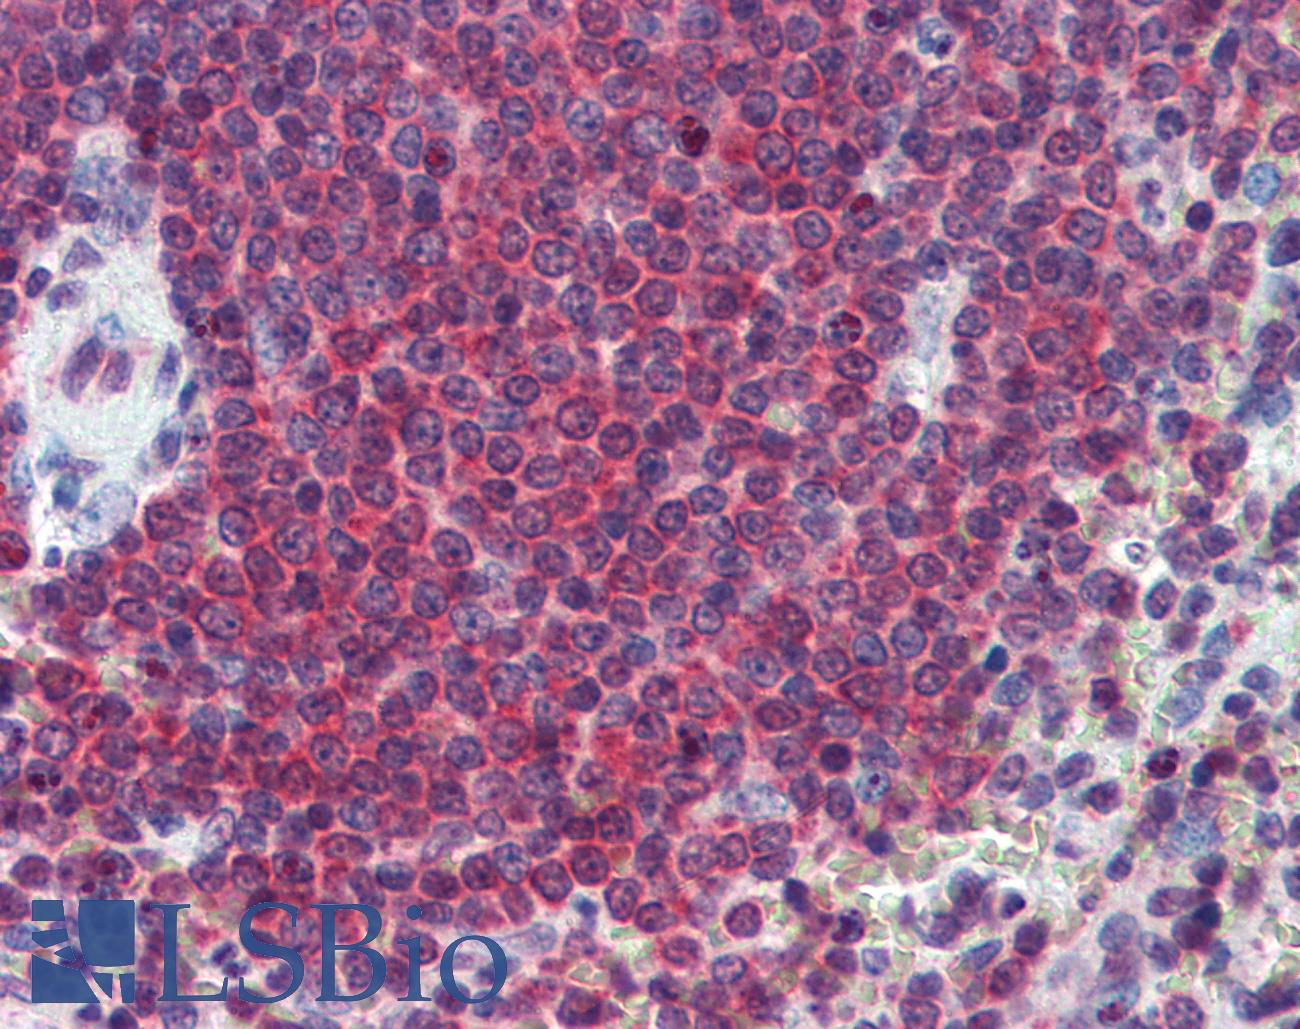 CA1 / Carbonic Anhydrase I Antibody - Anti-CA1 / Carbonic Anhydrase I antibody IHC of human spleen. Immunohistochemistry of formalin-fixed, paraffin-embedded tissue after heat-induced antigen retrieval. Antibody concentration 2.5 ug/ml.